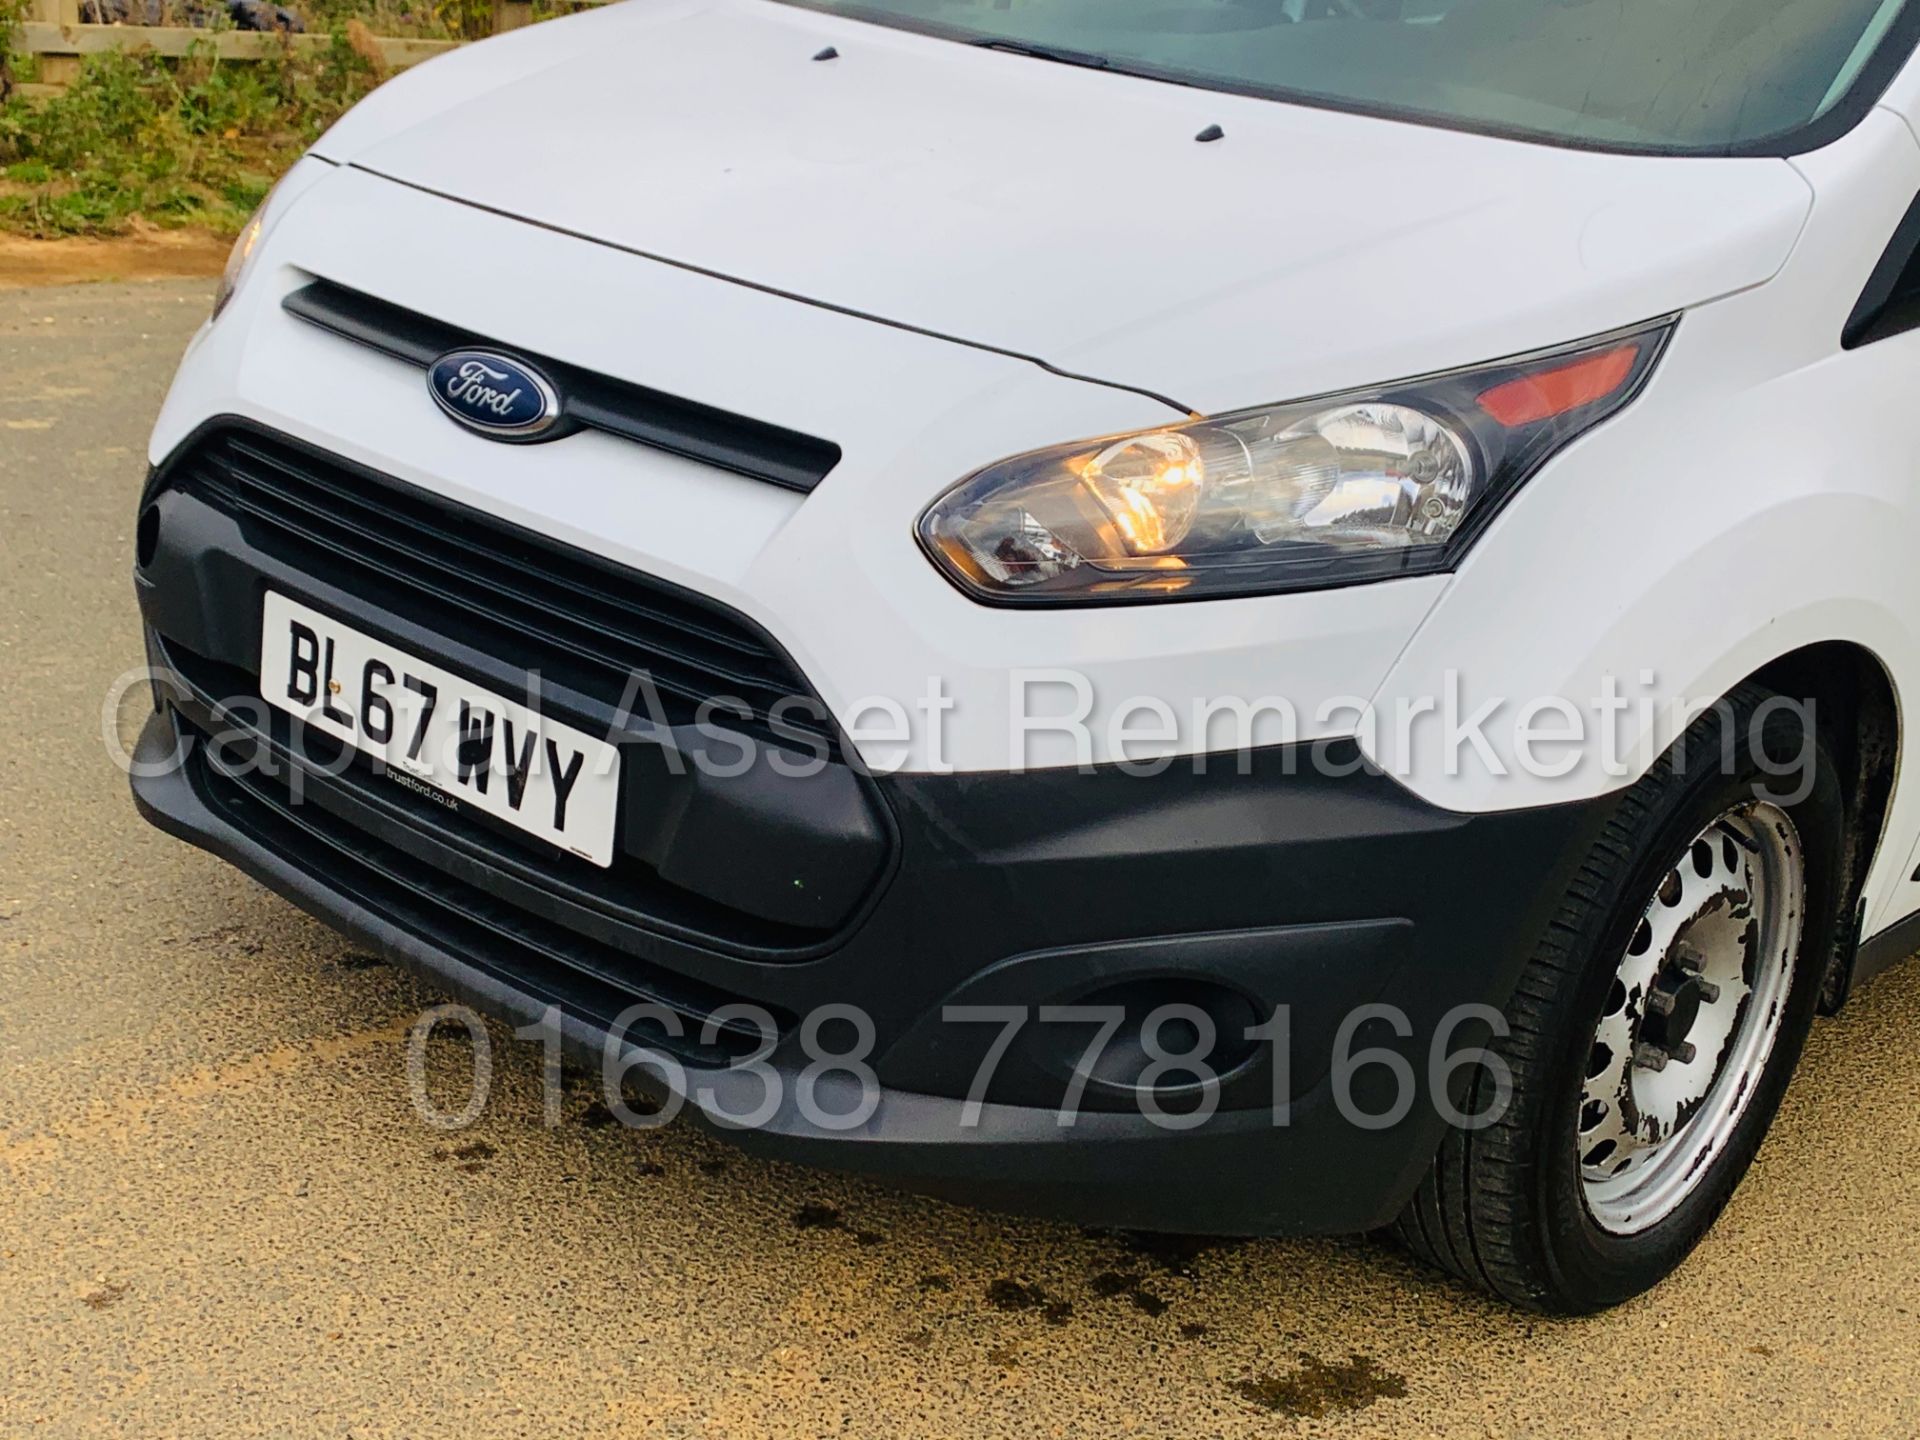 ON SALE FORD TRANSIT CONNECT *LWB- 5 SEATER CREW VAN* (2018 - EURO 6) 1.5 TDCI *AIR CON* (1 OWNER) - Image 16 of 45